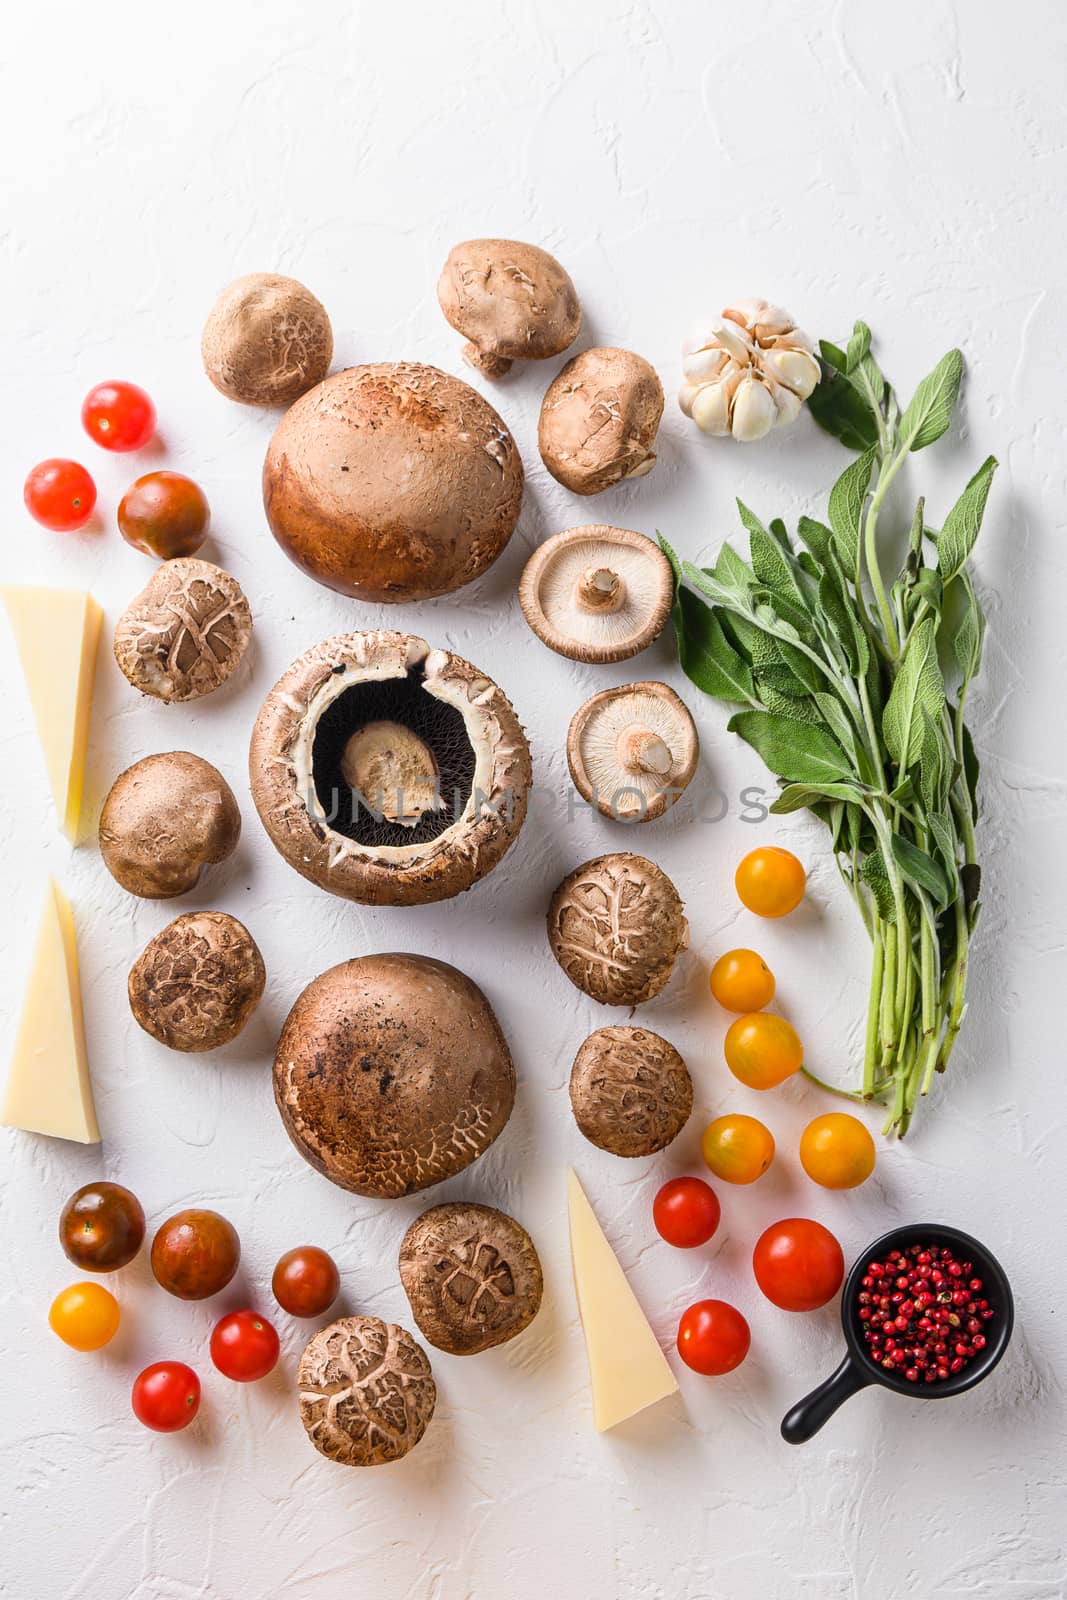 Portabello mushrooms ingredients for baking, cheddar cheese, cherry tomatoes and sage on white background, top view. by Ilianesolenyi